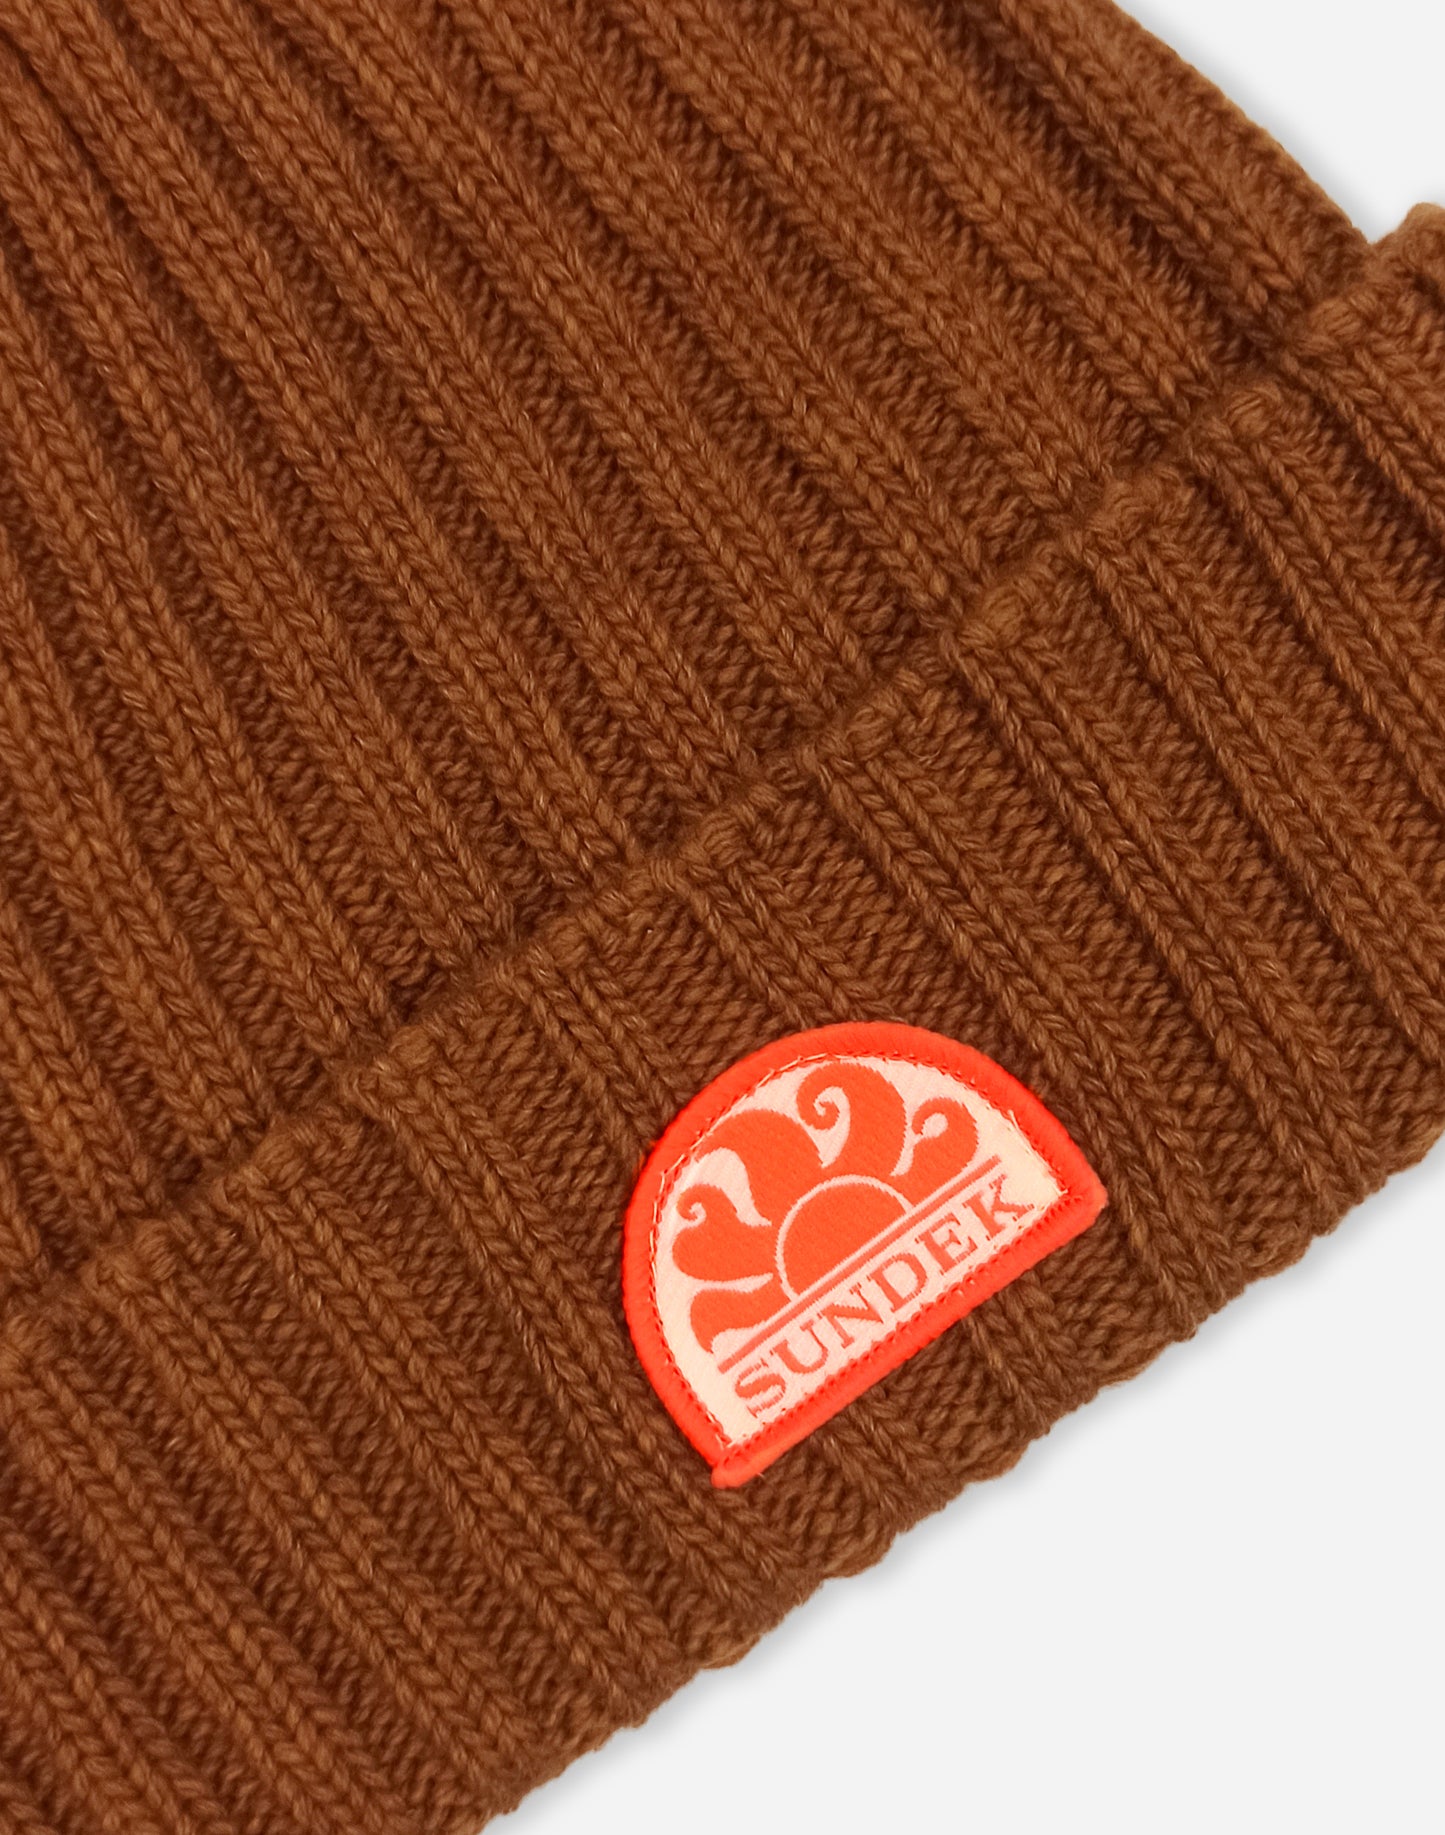 BEANIE WITH ICONIC PATCH